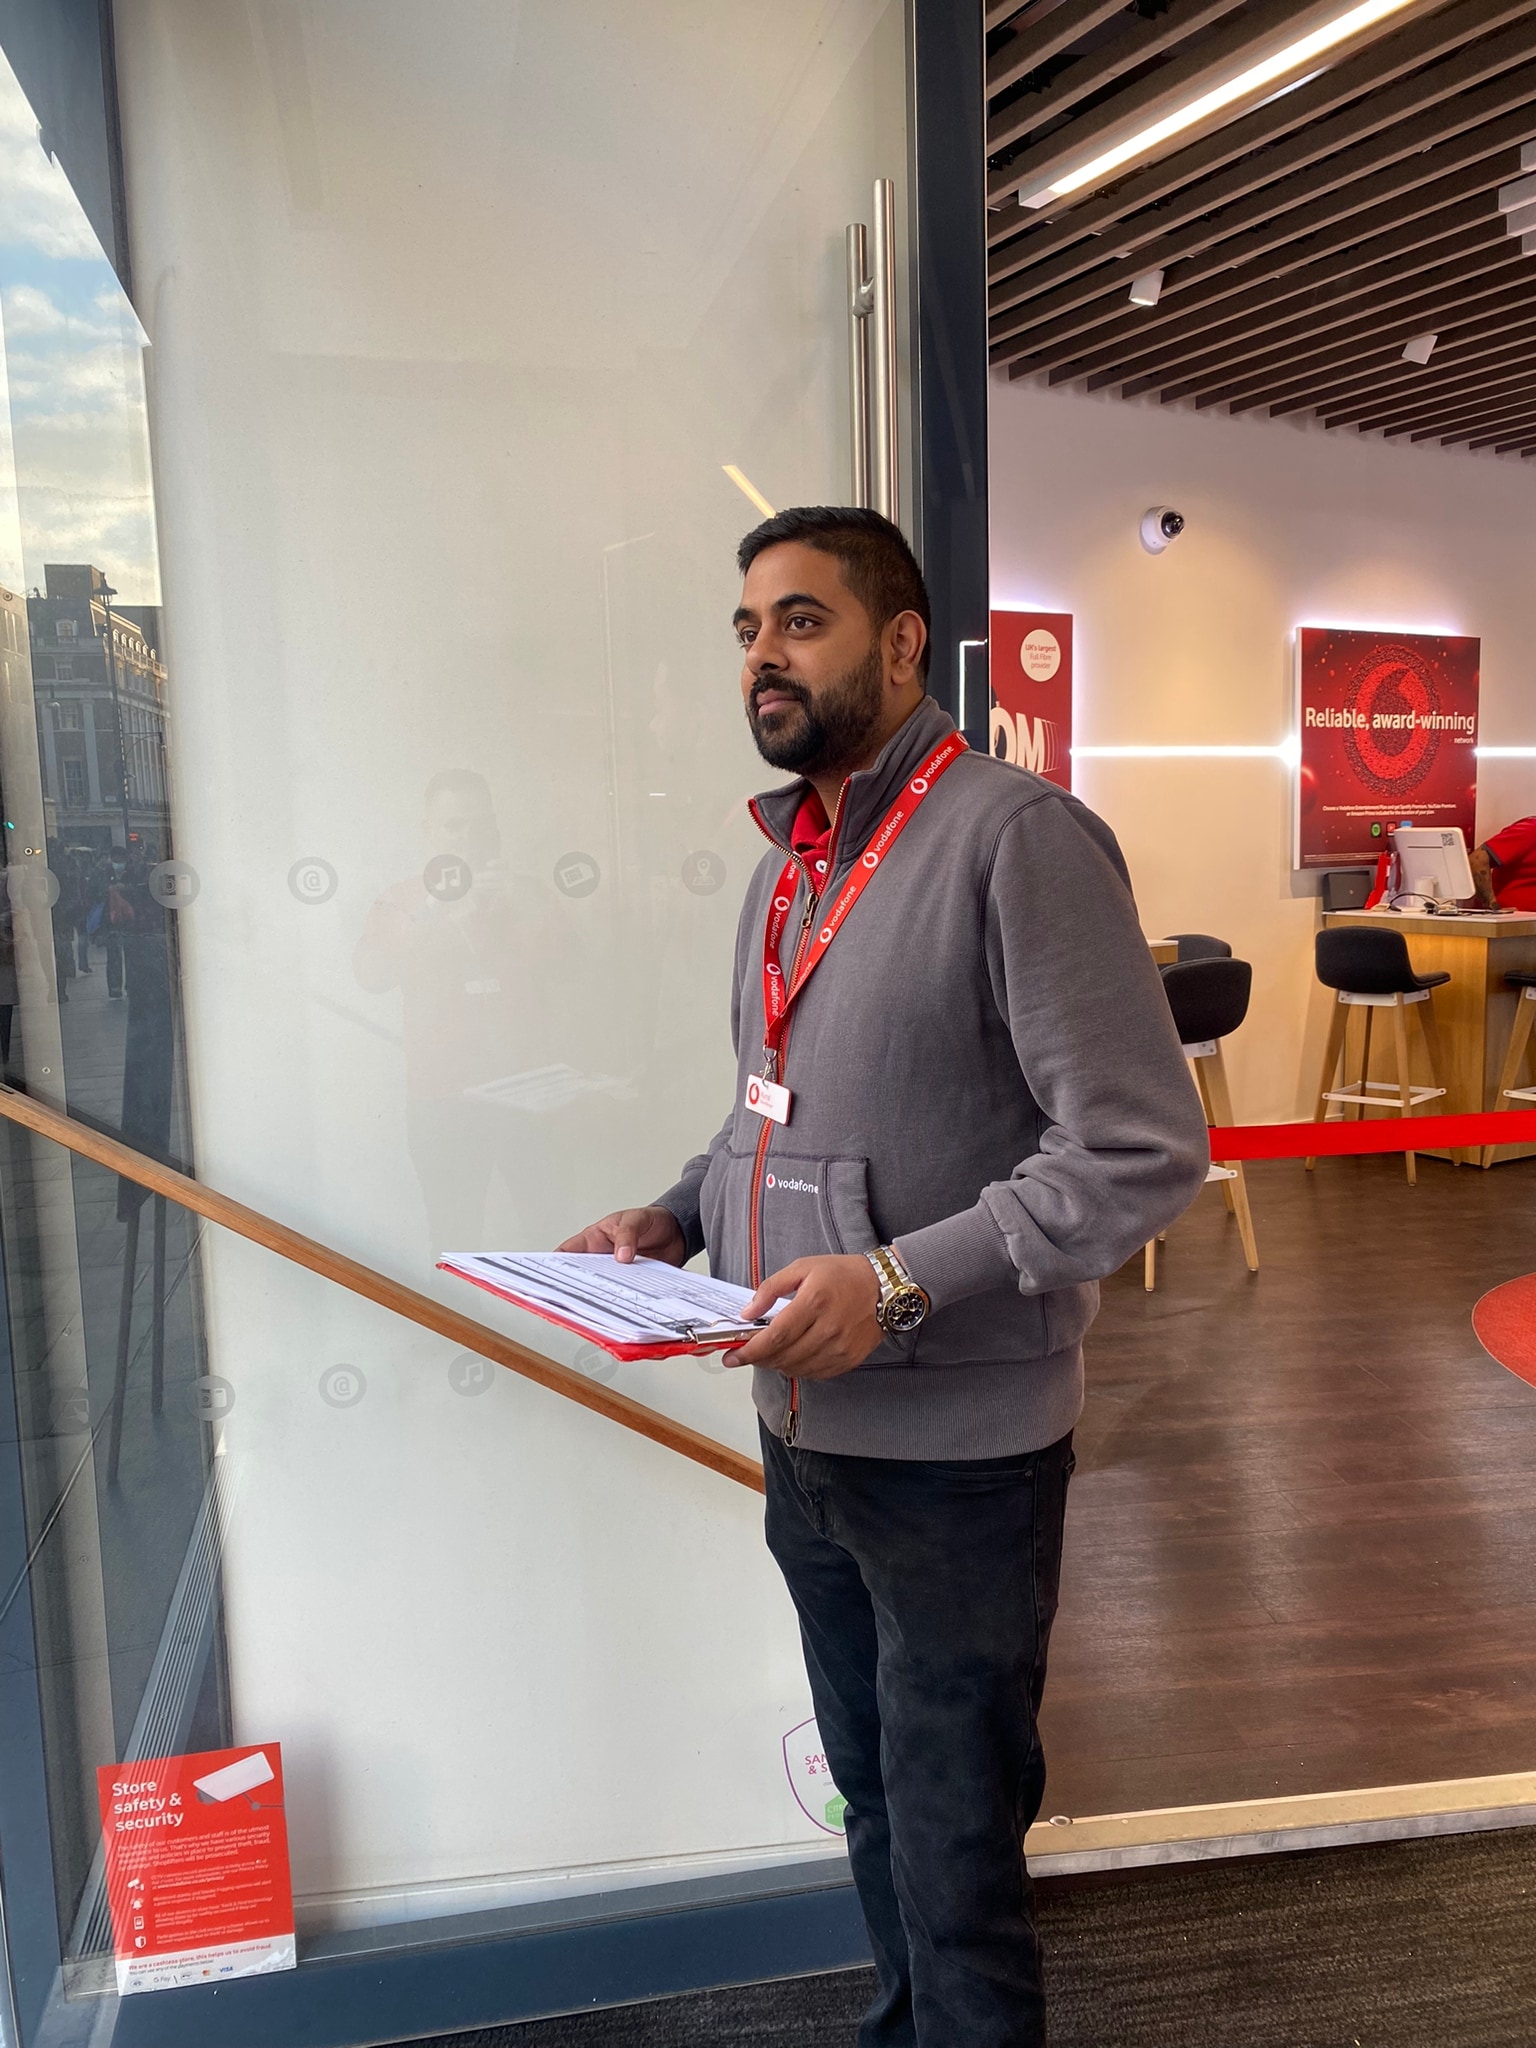 A Vodafone retail colleague in the retail store speaking to a customer